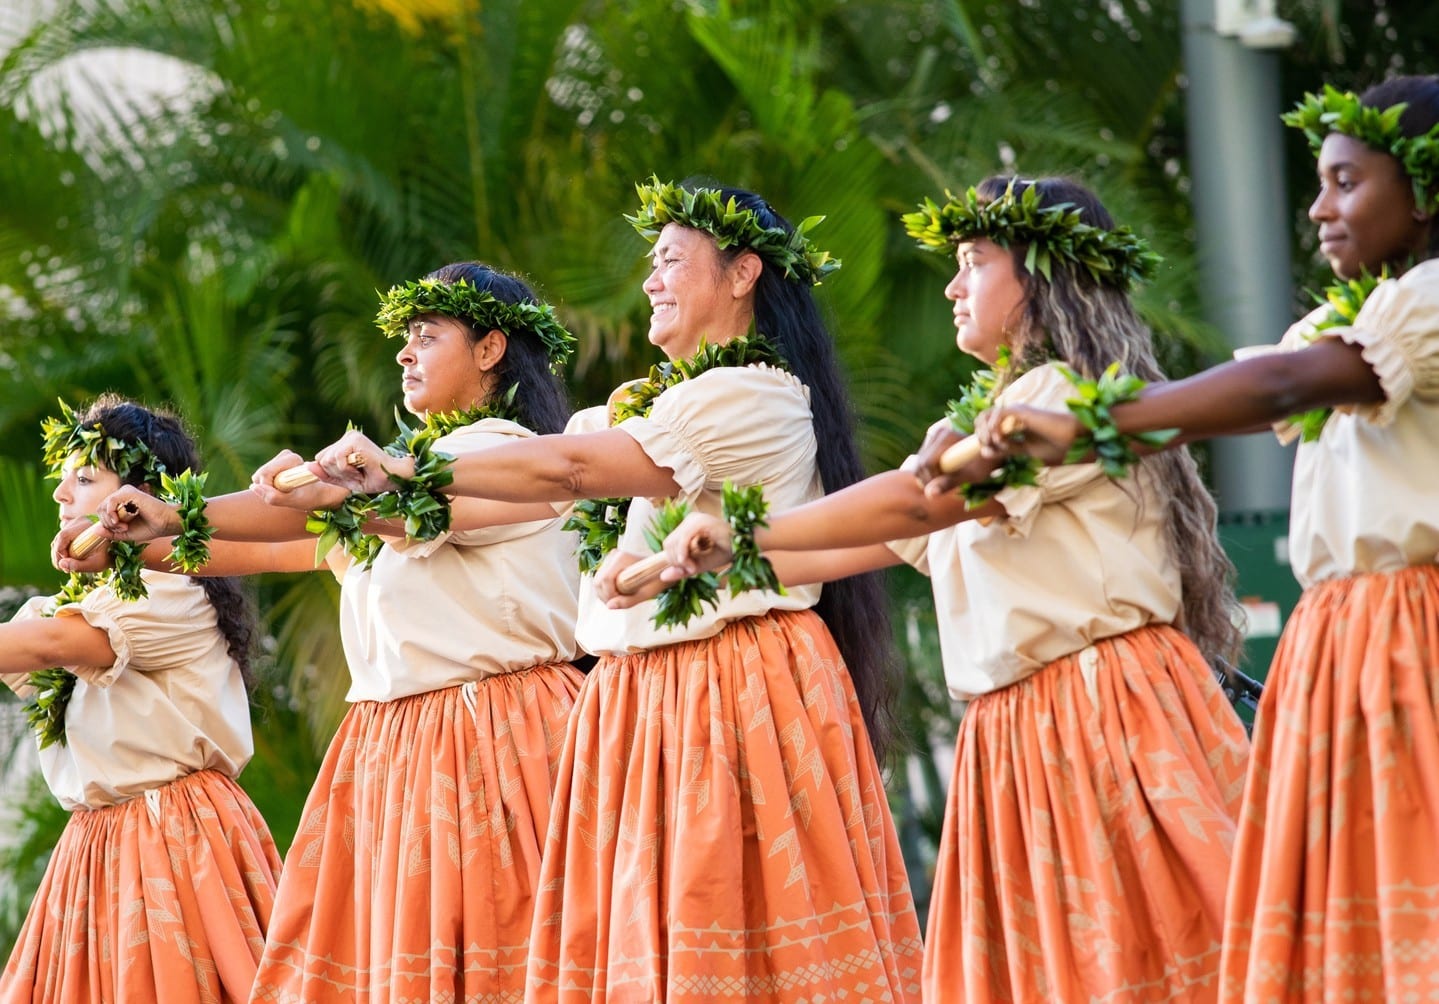 Kona Nui Nights returns this summer to Victoria Ward Park! Mark your calendar for Wednesday, June 7 for the kick-off of the popular event series showcasing Hawaiian traditions, live music, and hula performed under the palms.